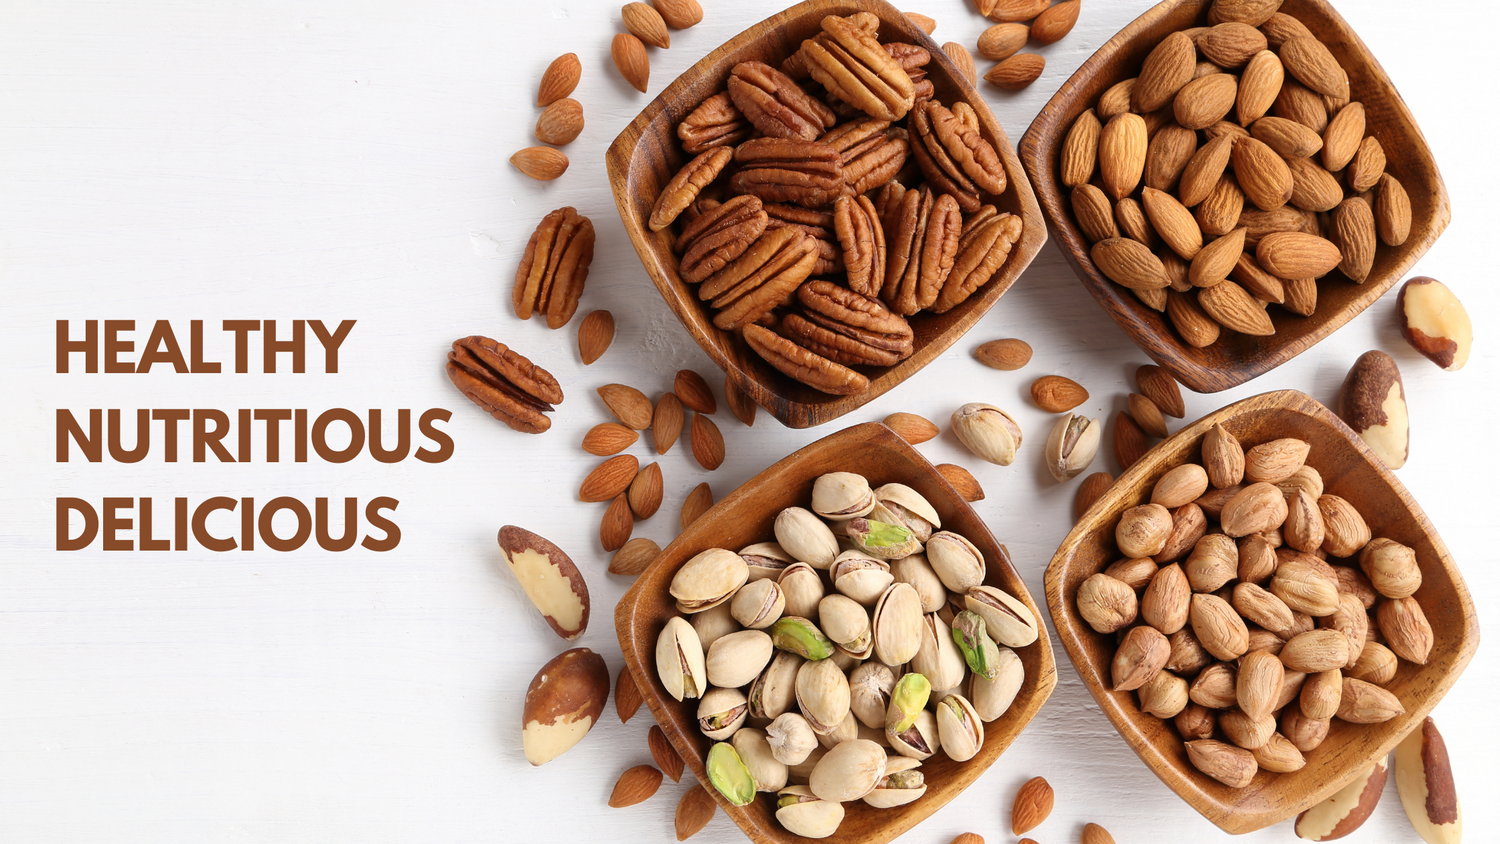 The Nuttery Banner with cups of Almonds, Pecans, Pistachios, peanuts and other nuts on a white background that says Healthy, Nutritious and Delicious 